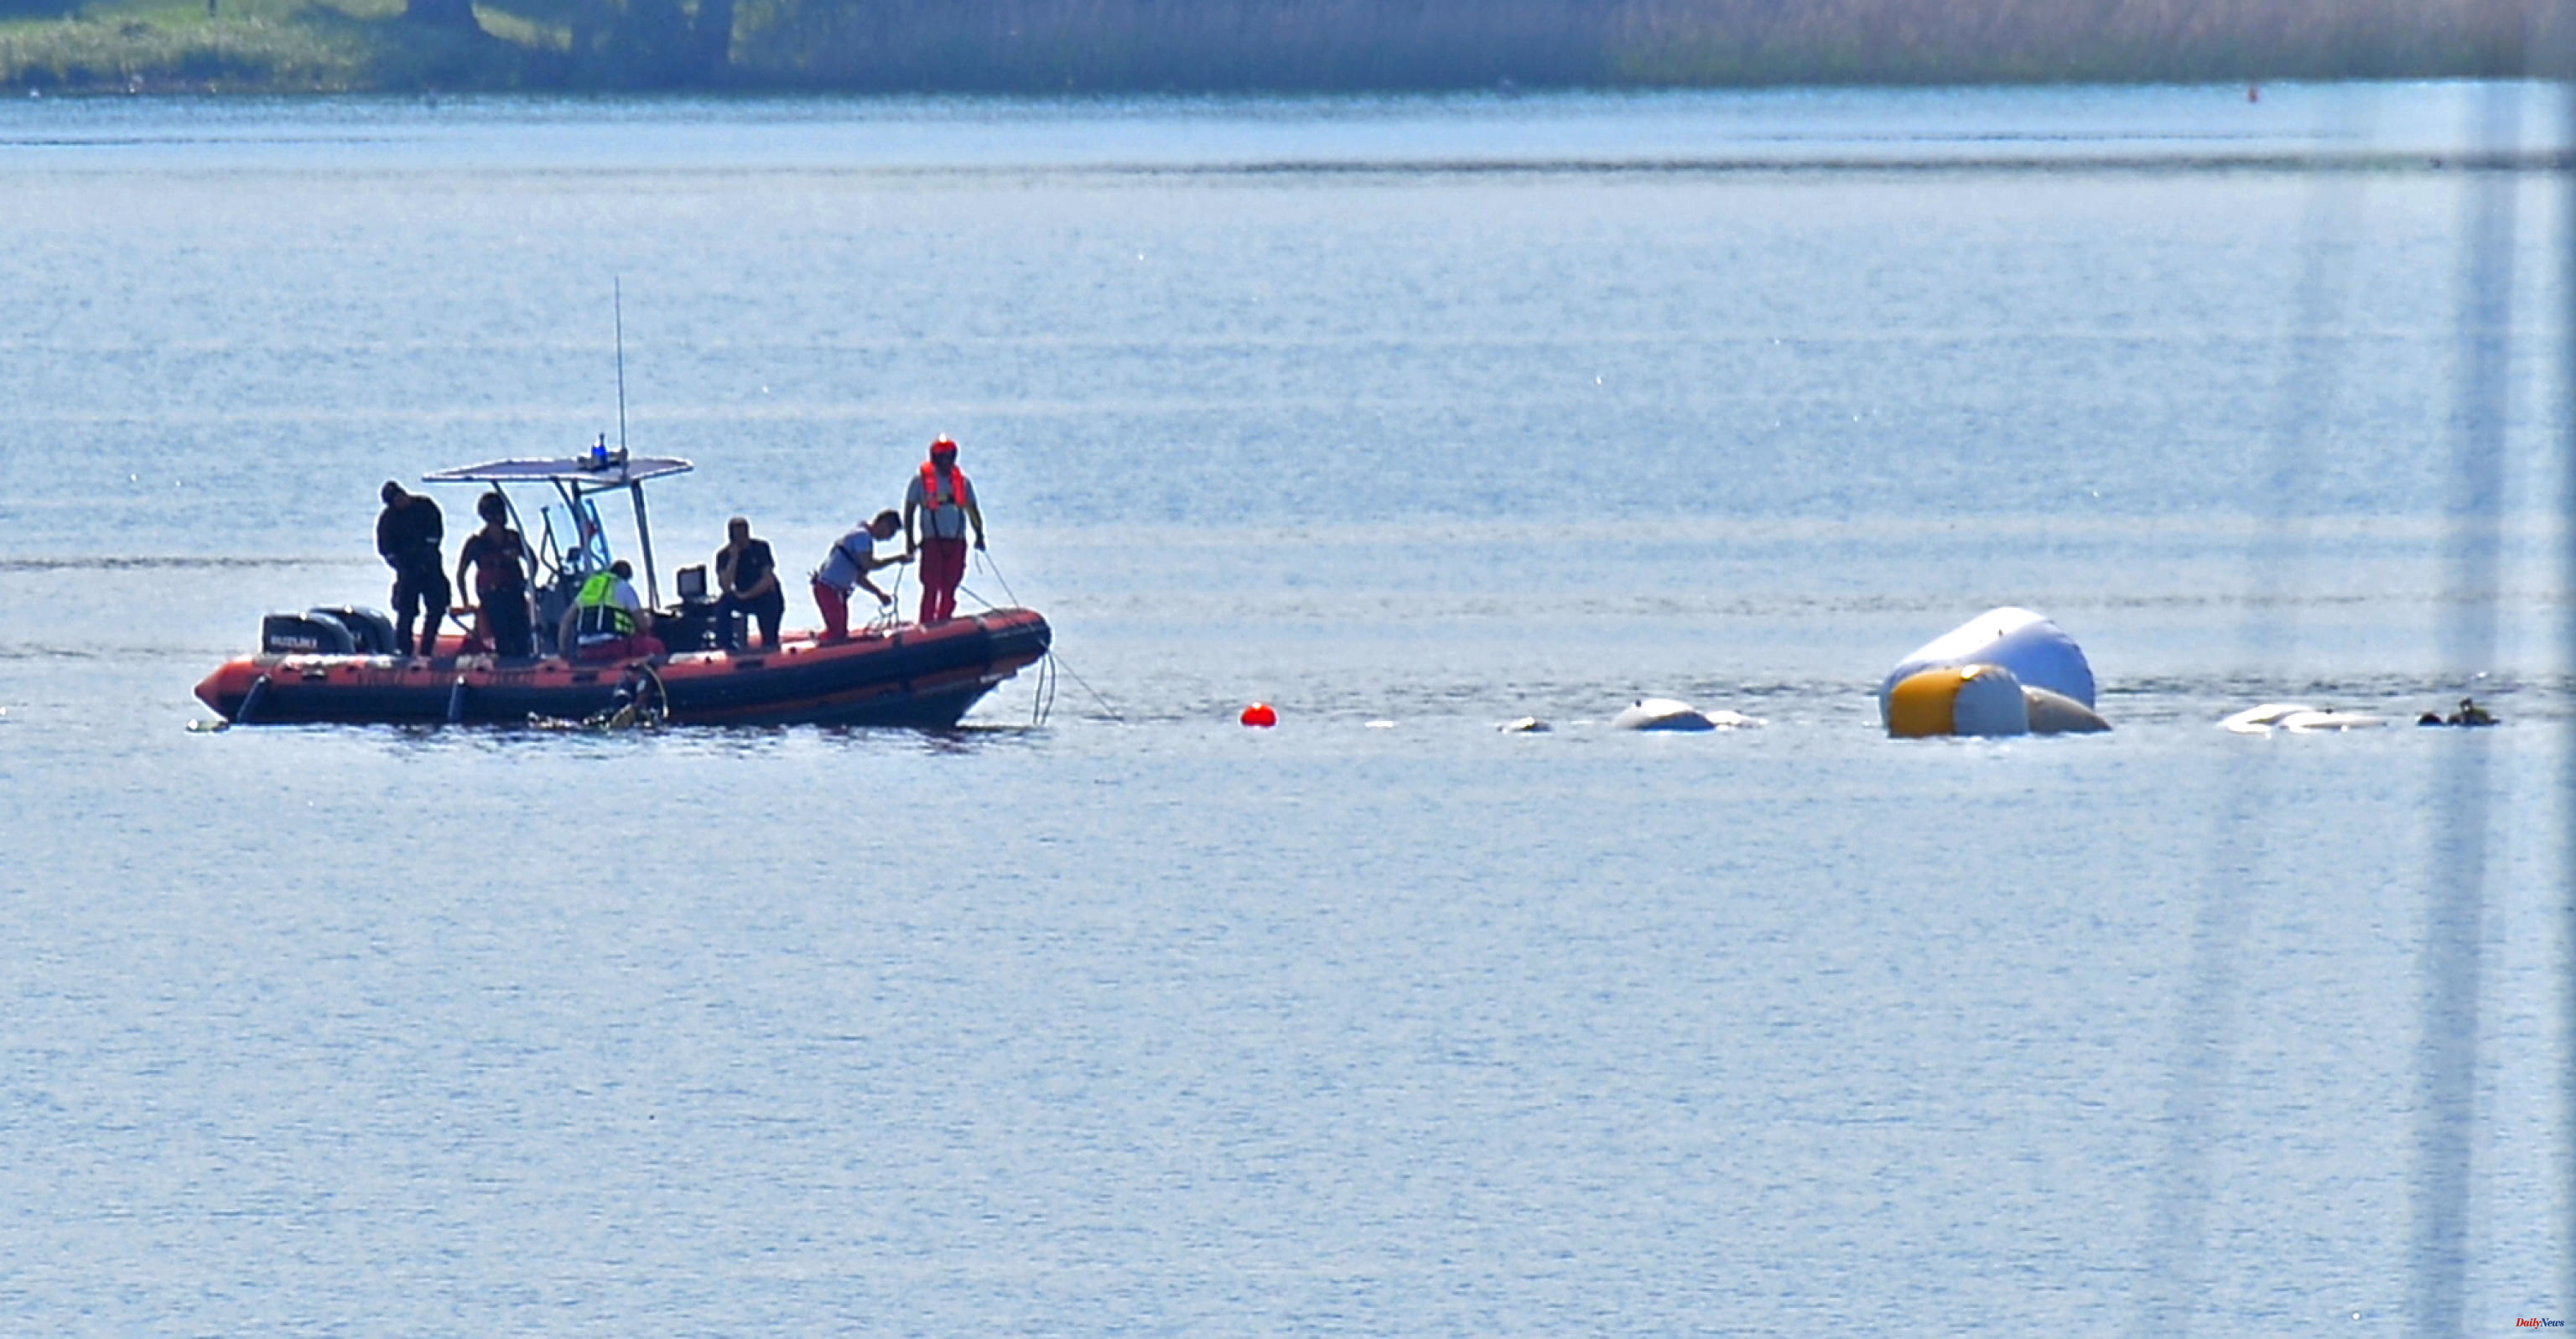 Italy Two Italian spies and a Mossad agent among the four killed in the sinking of a boat on Lake Maggiore